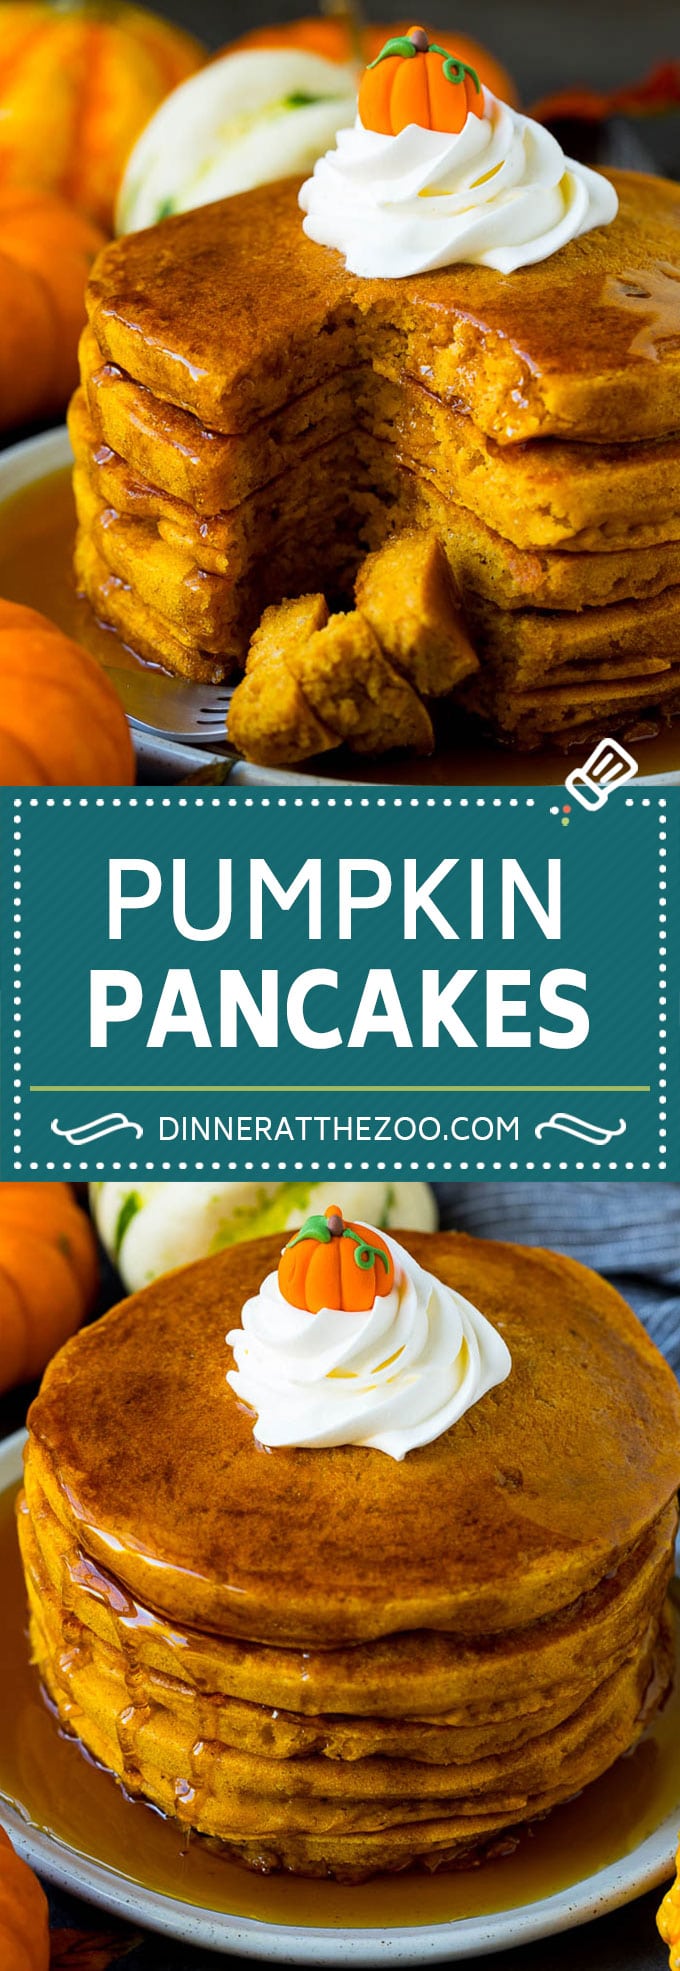 These pumpkin pancakes are light and fluffy buttermilk hotcakes flavored with pumpkin puree and spices.